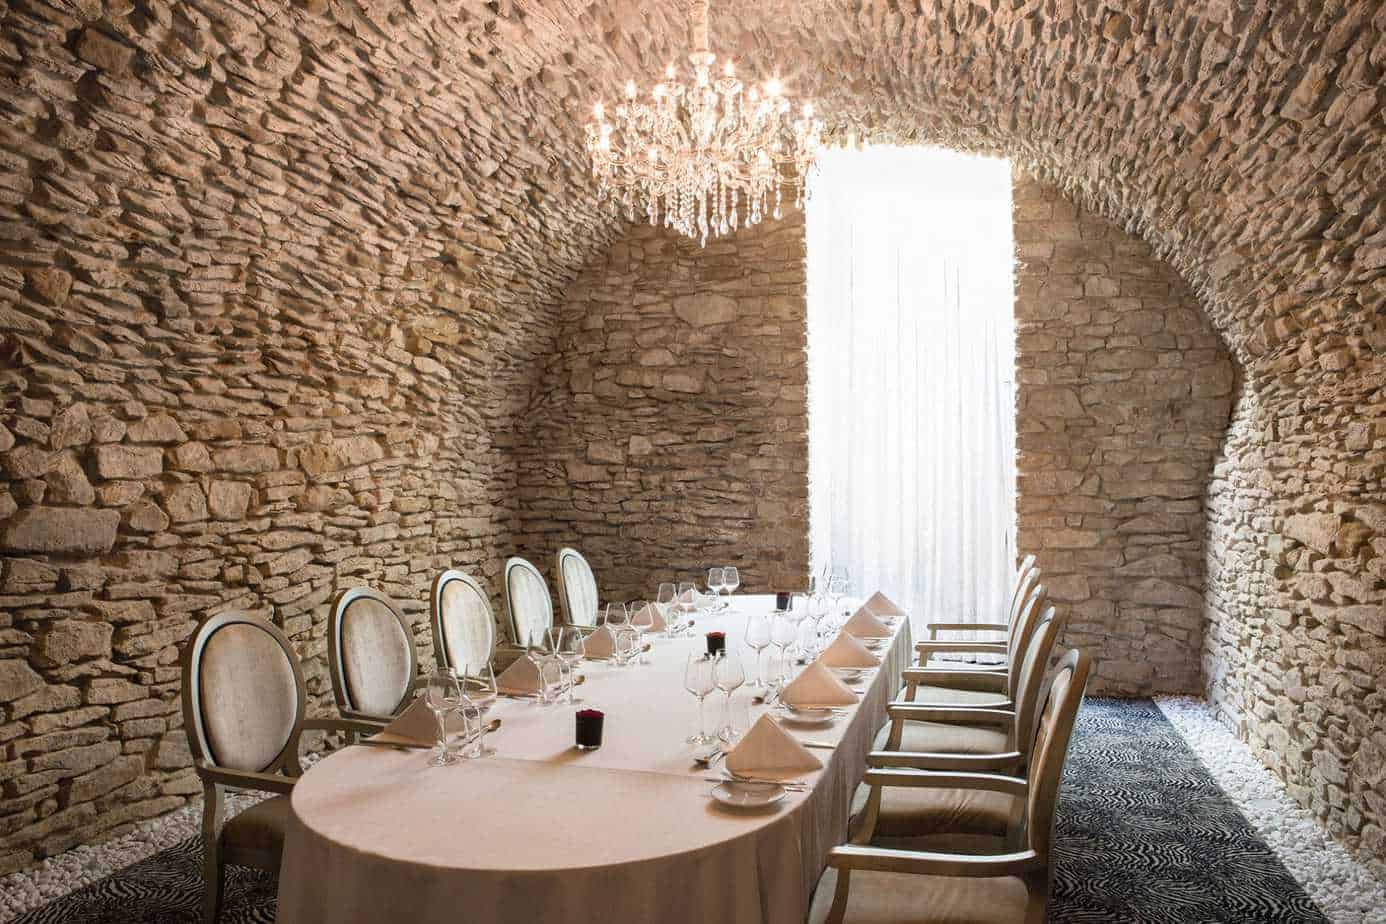 Unique ancient meeting room with stone walls